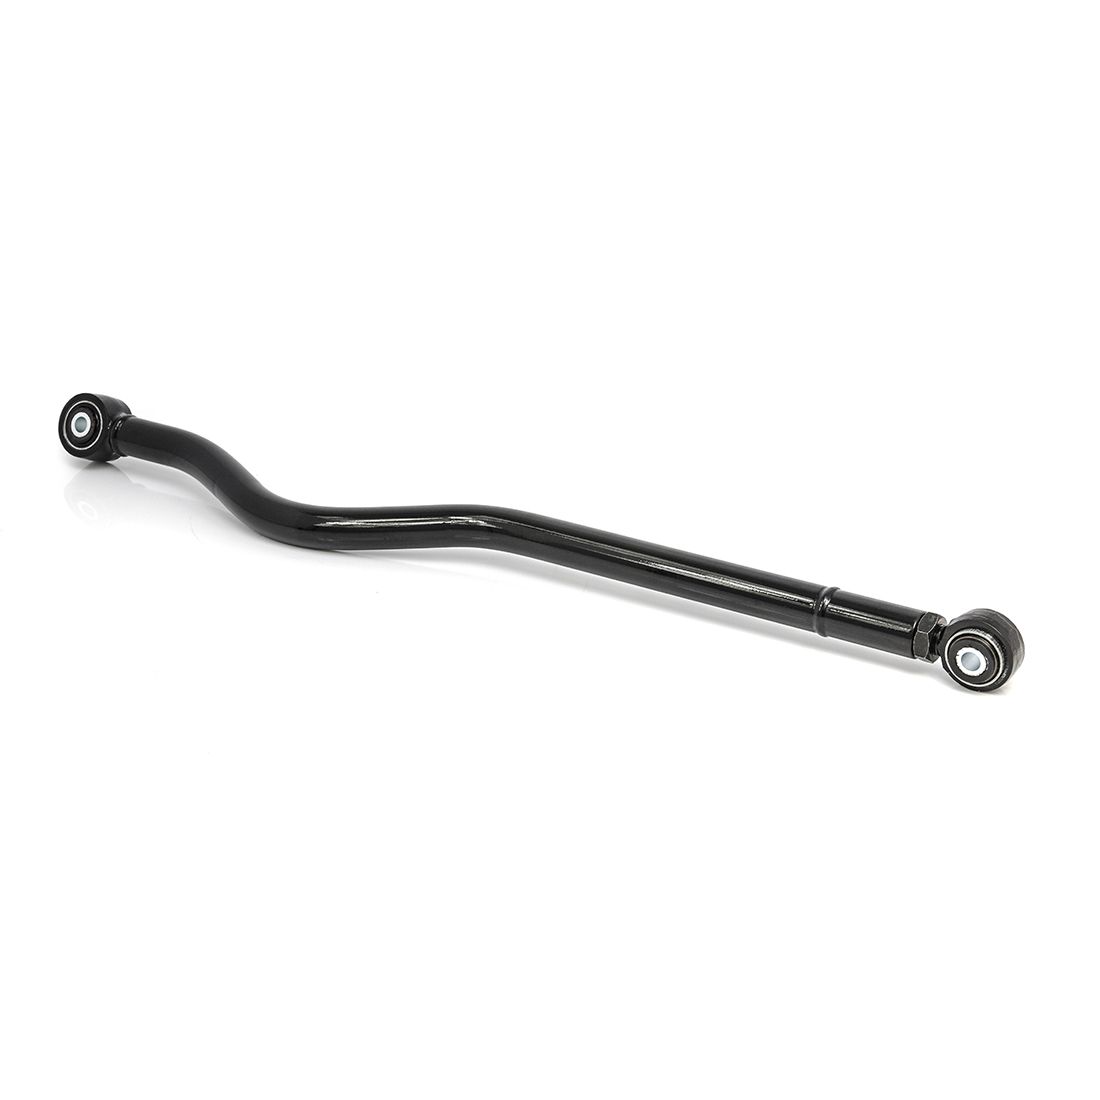 REAR TRACK BAR-ADJUSTABLE LIFT 0-4 INCHES for JEEP WRANGLER JL 2018+-Q0274 